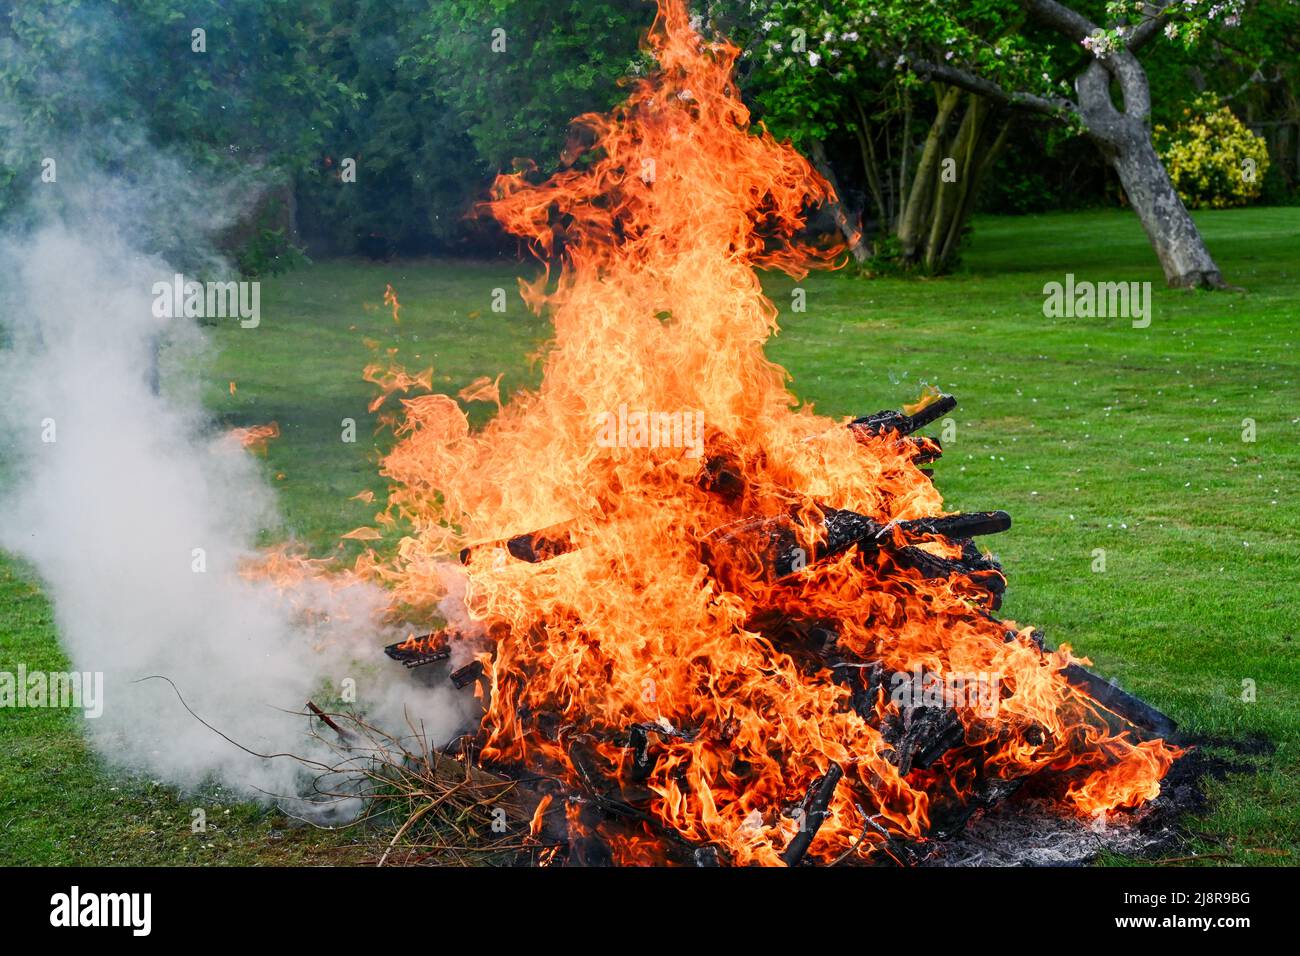 A garden bonfire with flames raging and smoke billowing out from the side Stock Photo